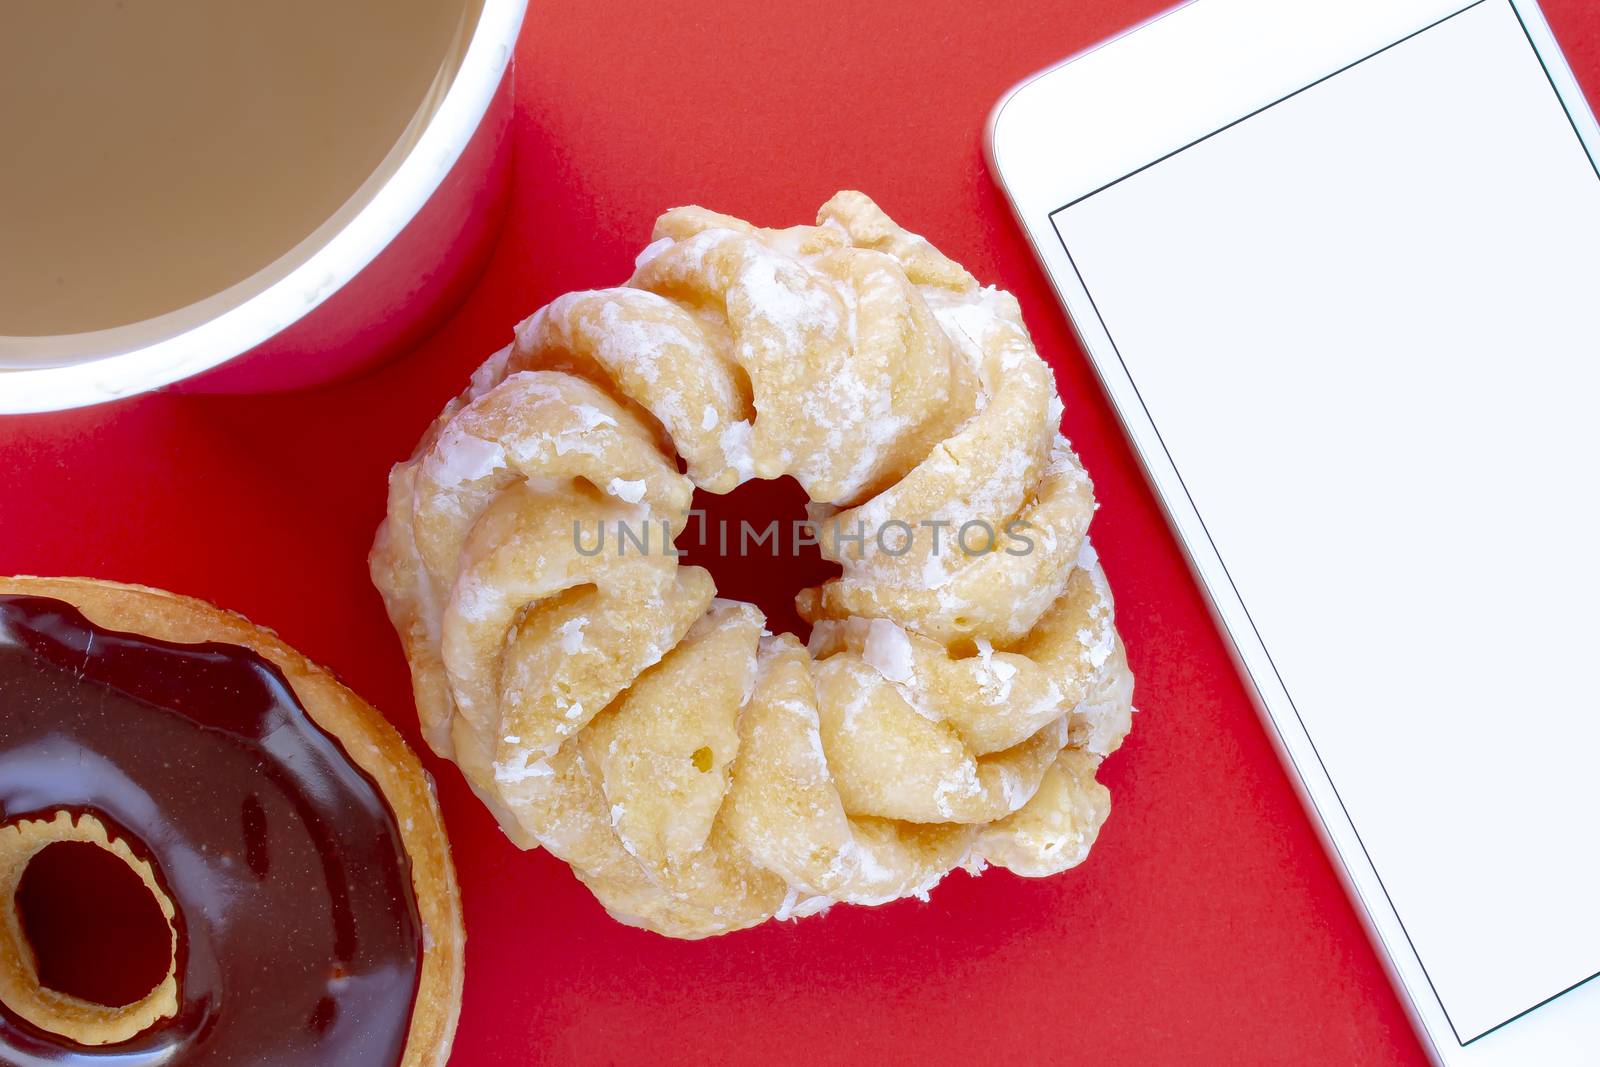 A cup of coffee with a Chocolate Dip Donut and Honey Cruller Donut with a smartphone